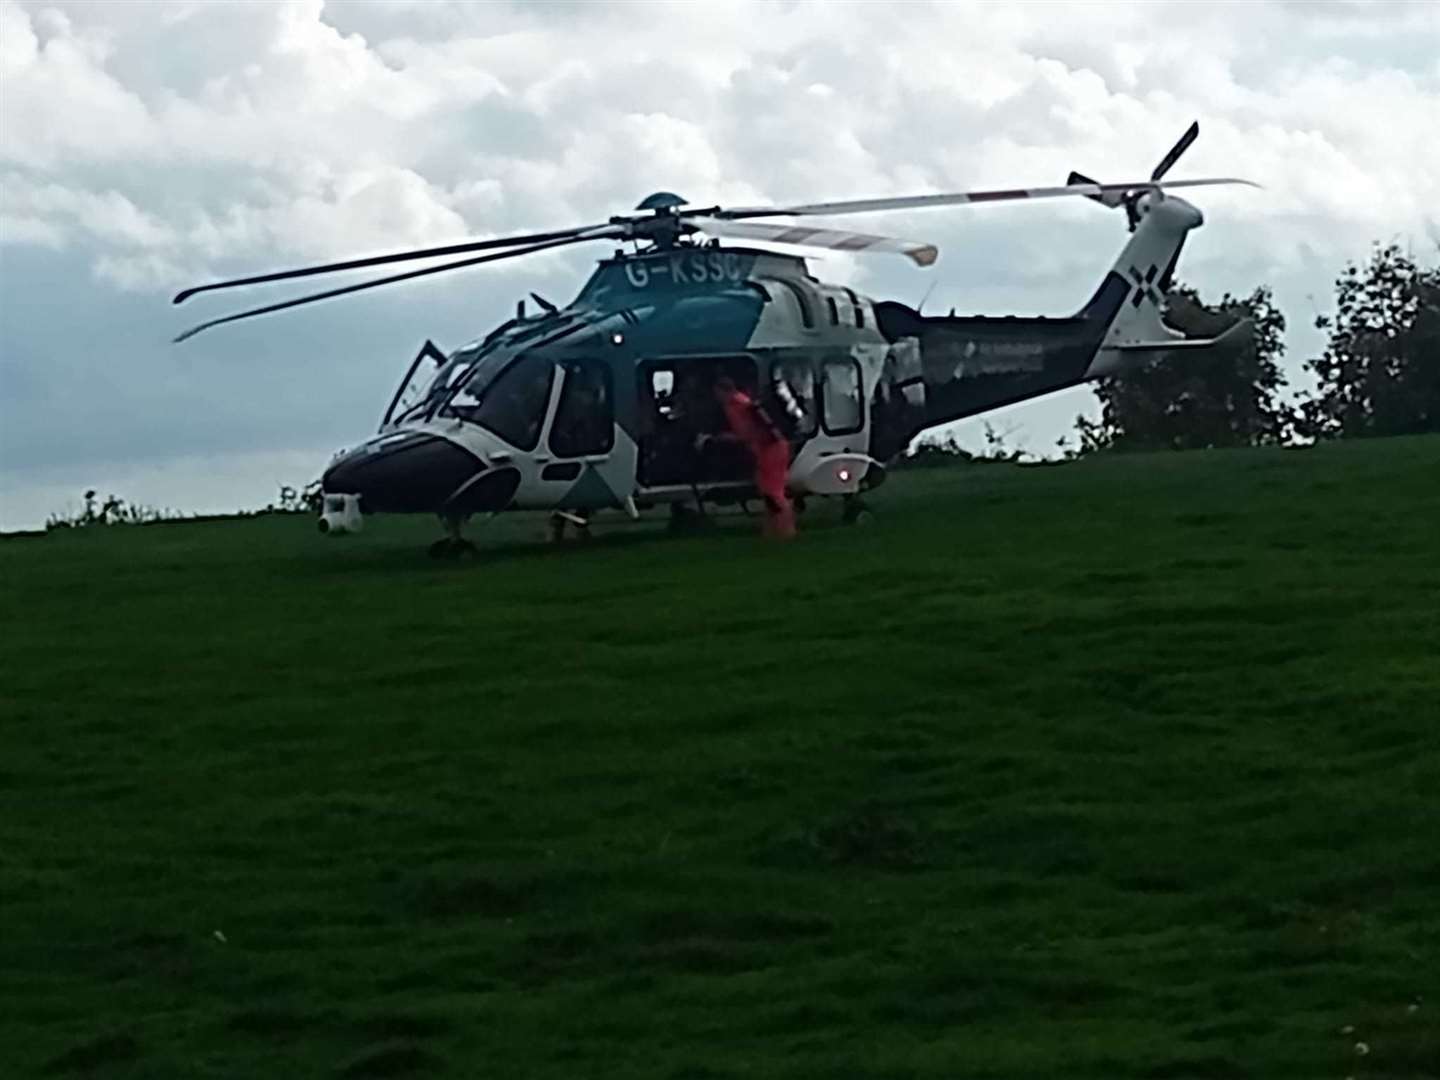 The air ambulance landed nearby on East Cliff. Photo: Thomas Bickley